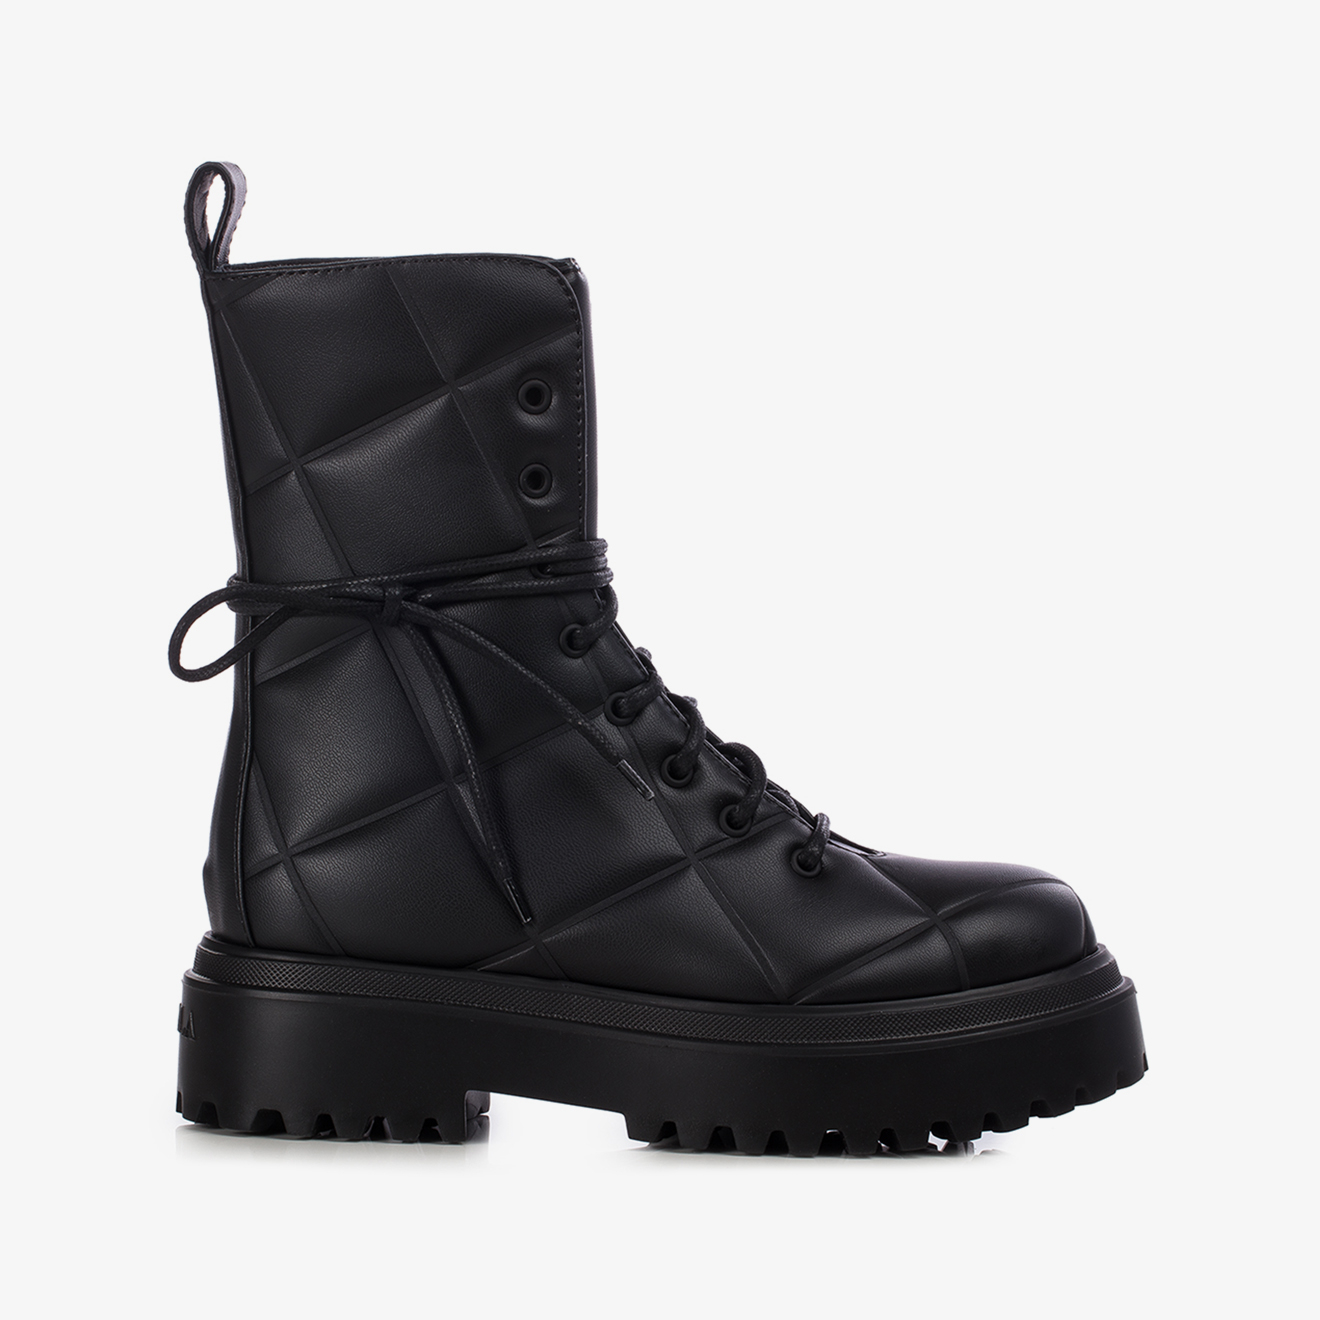 RANGER ANKLE BOOT 50 mm - Le Silla official outlet